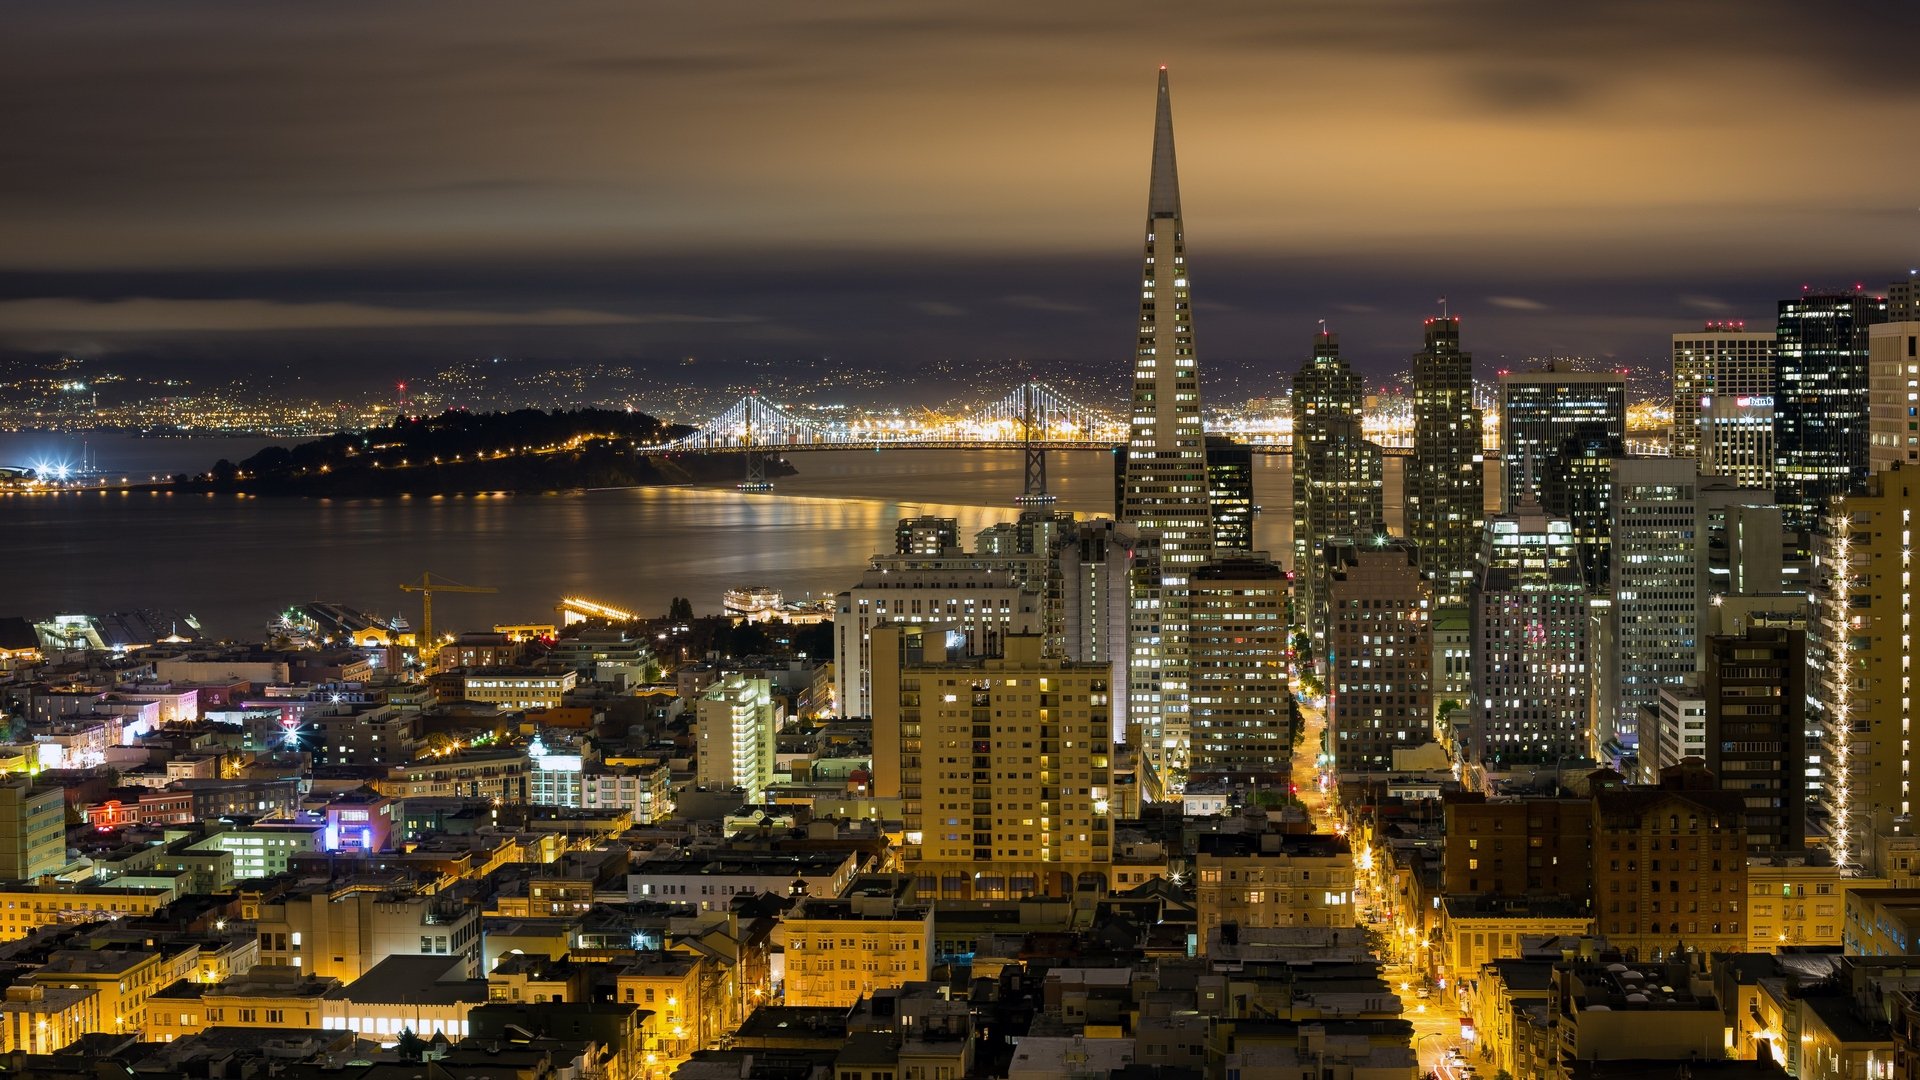 Download 1080p San Francisco PC background ID:493227 for free